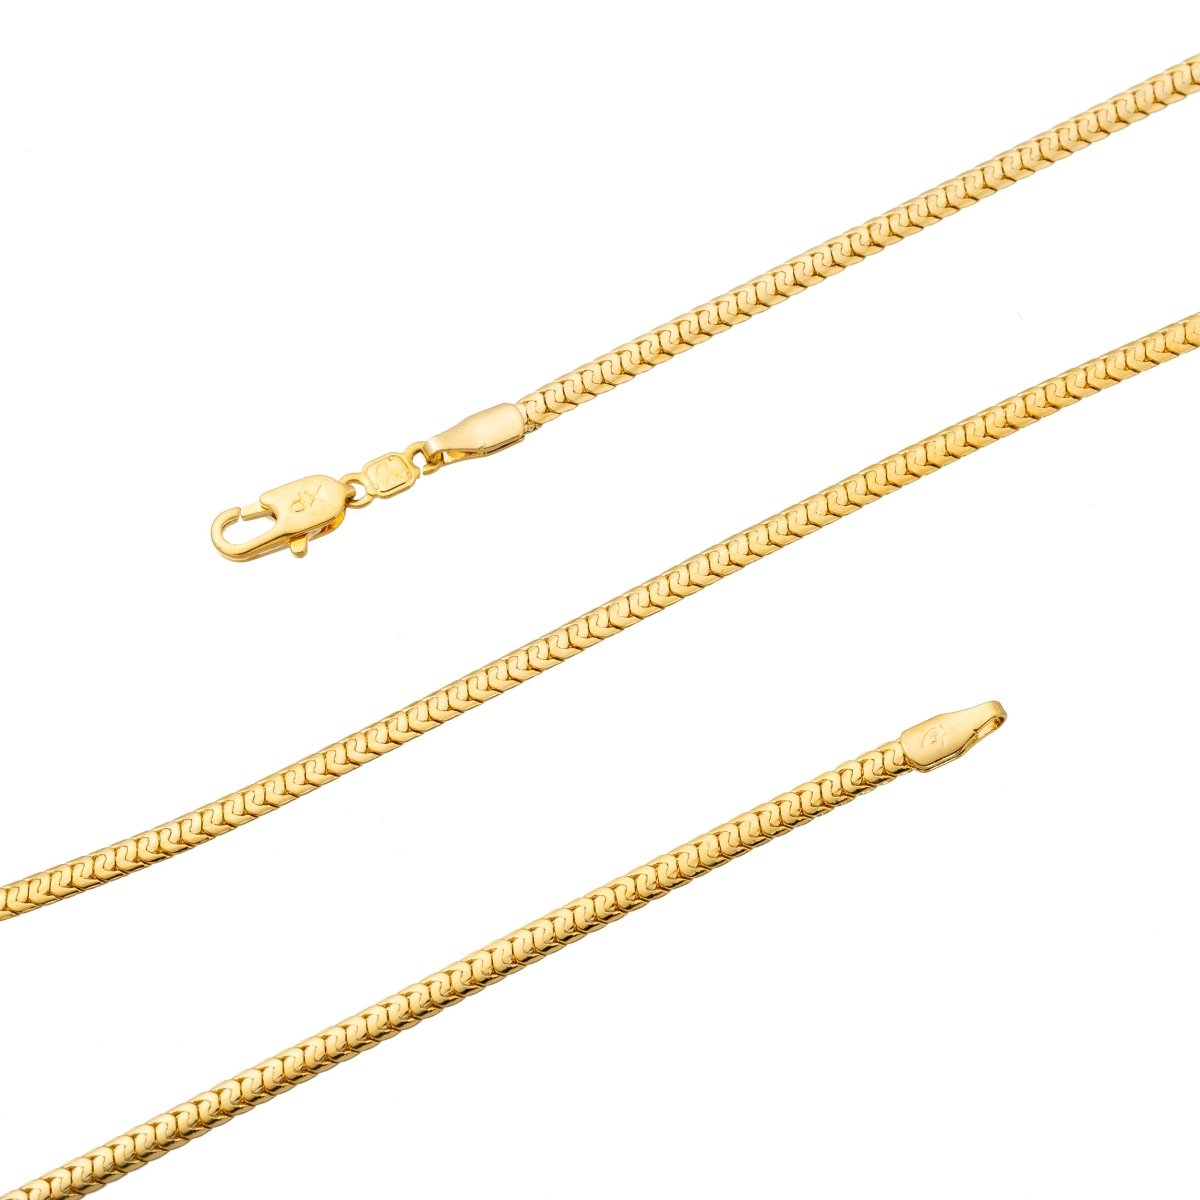 23.5 inch Snake Chain Necklace, 24K Gold Plated Snake Finished Chain Necklace For Jewelry Making, Dainty 2mm Snake Necklace w/ Spring Ring | CN-296 Clearance Pricing - DLUXCA